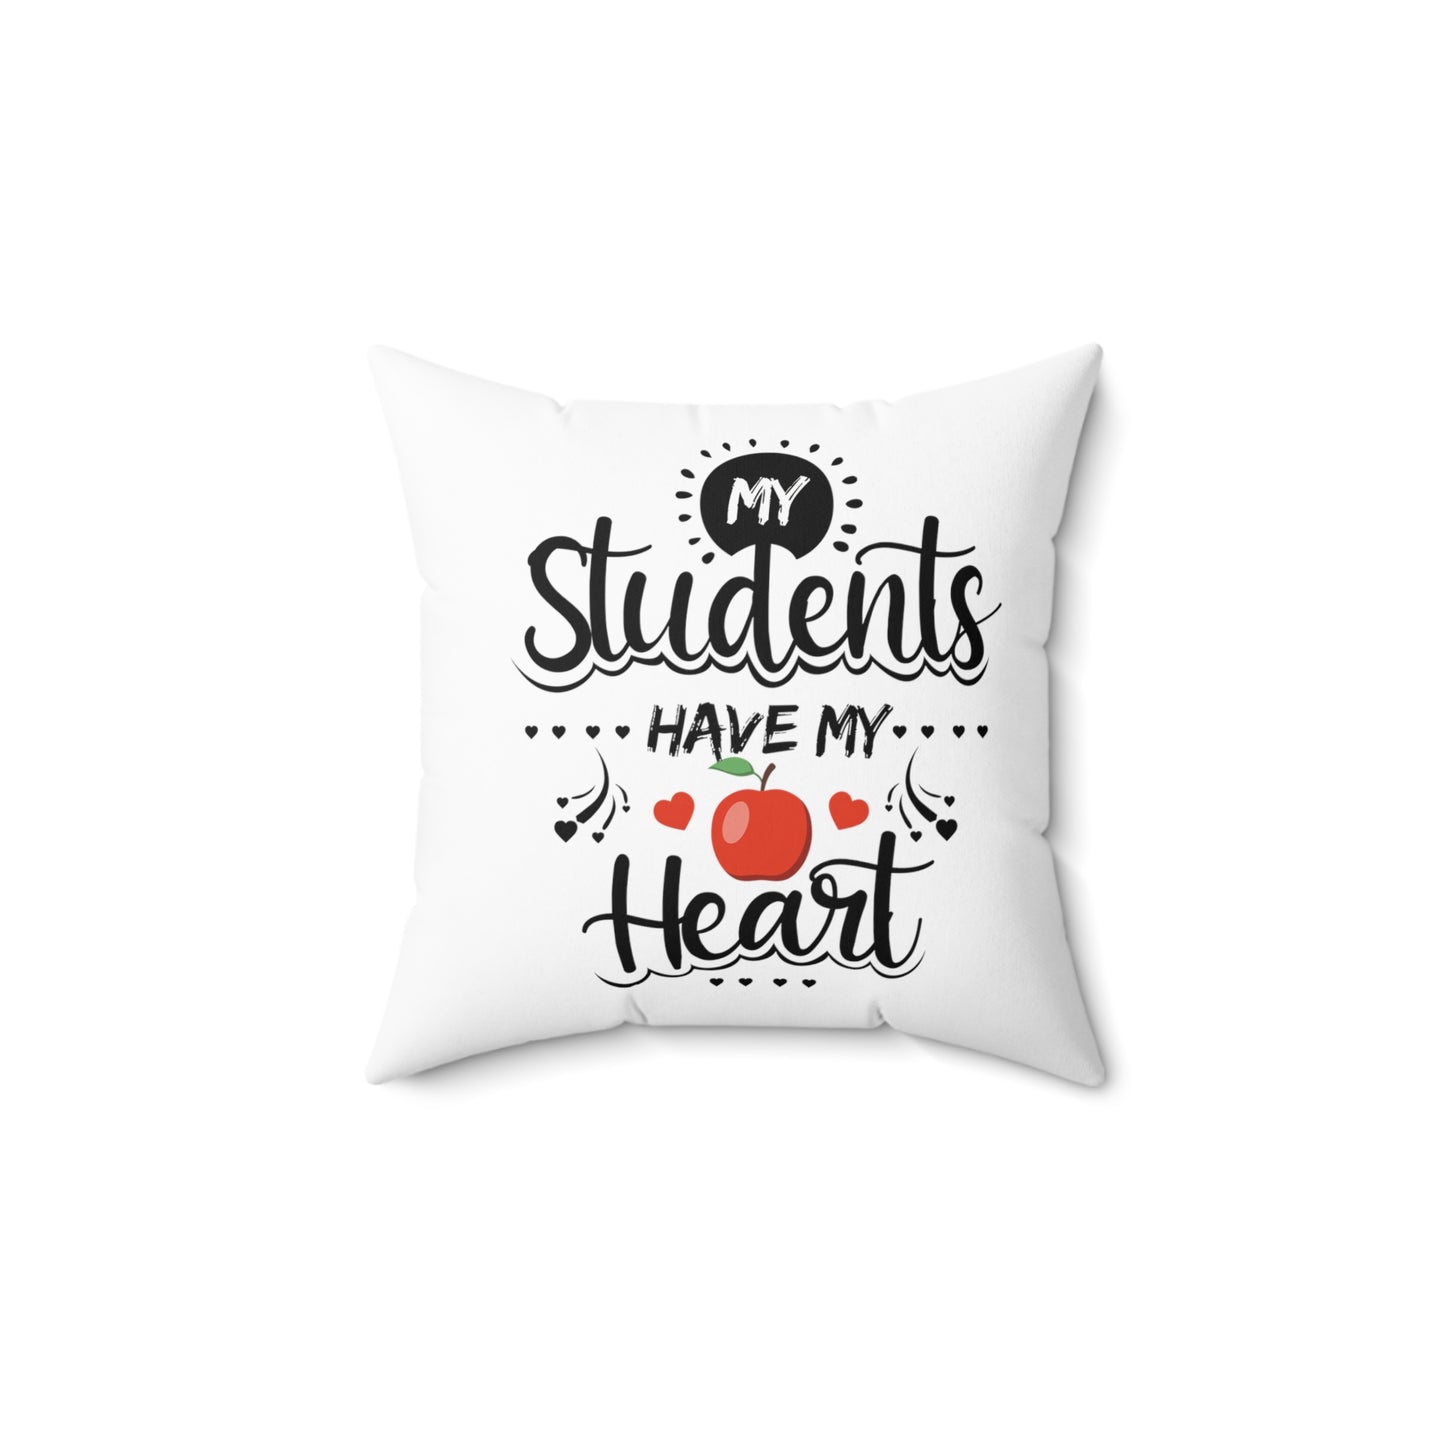 Students Have My Heart Square Pillow